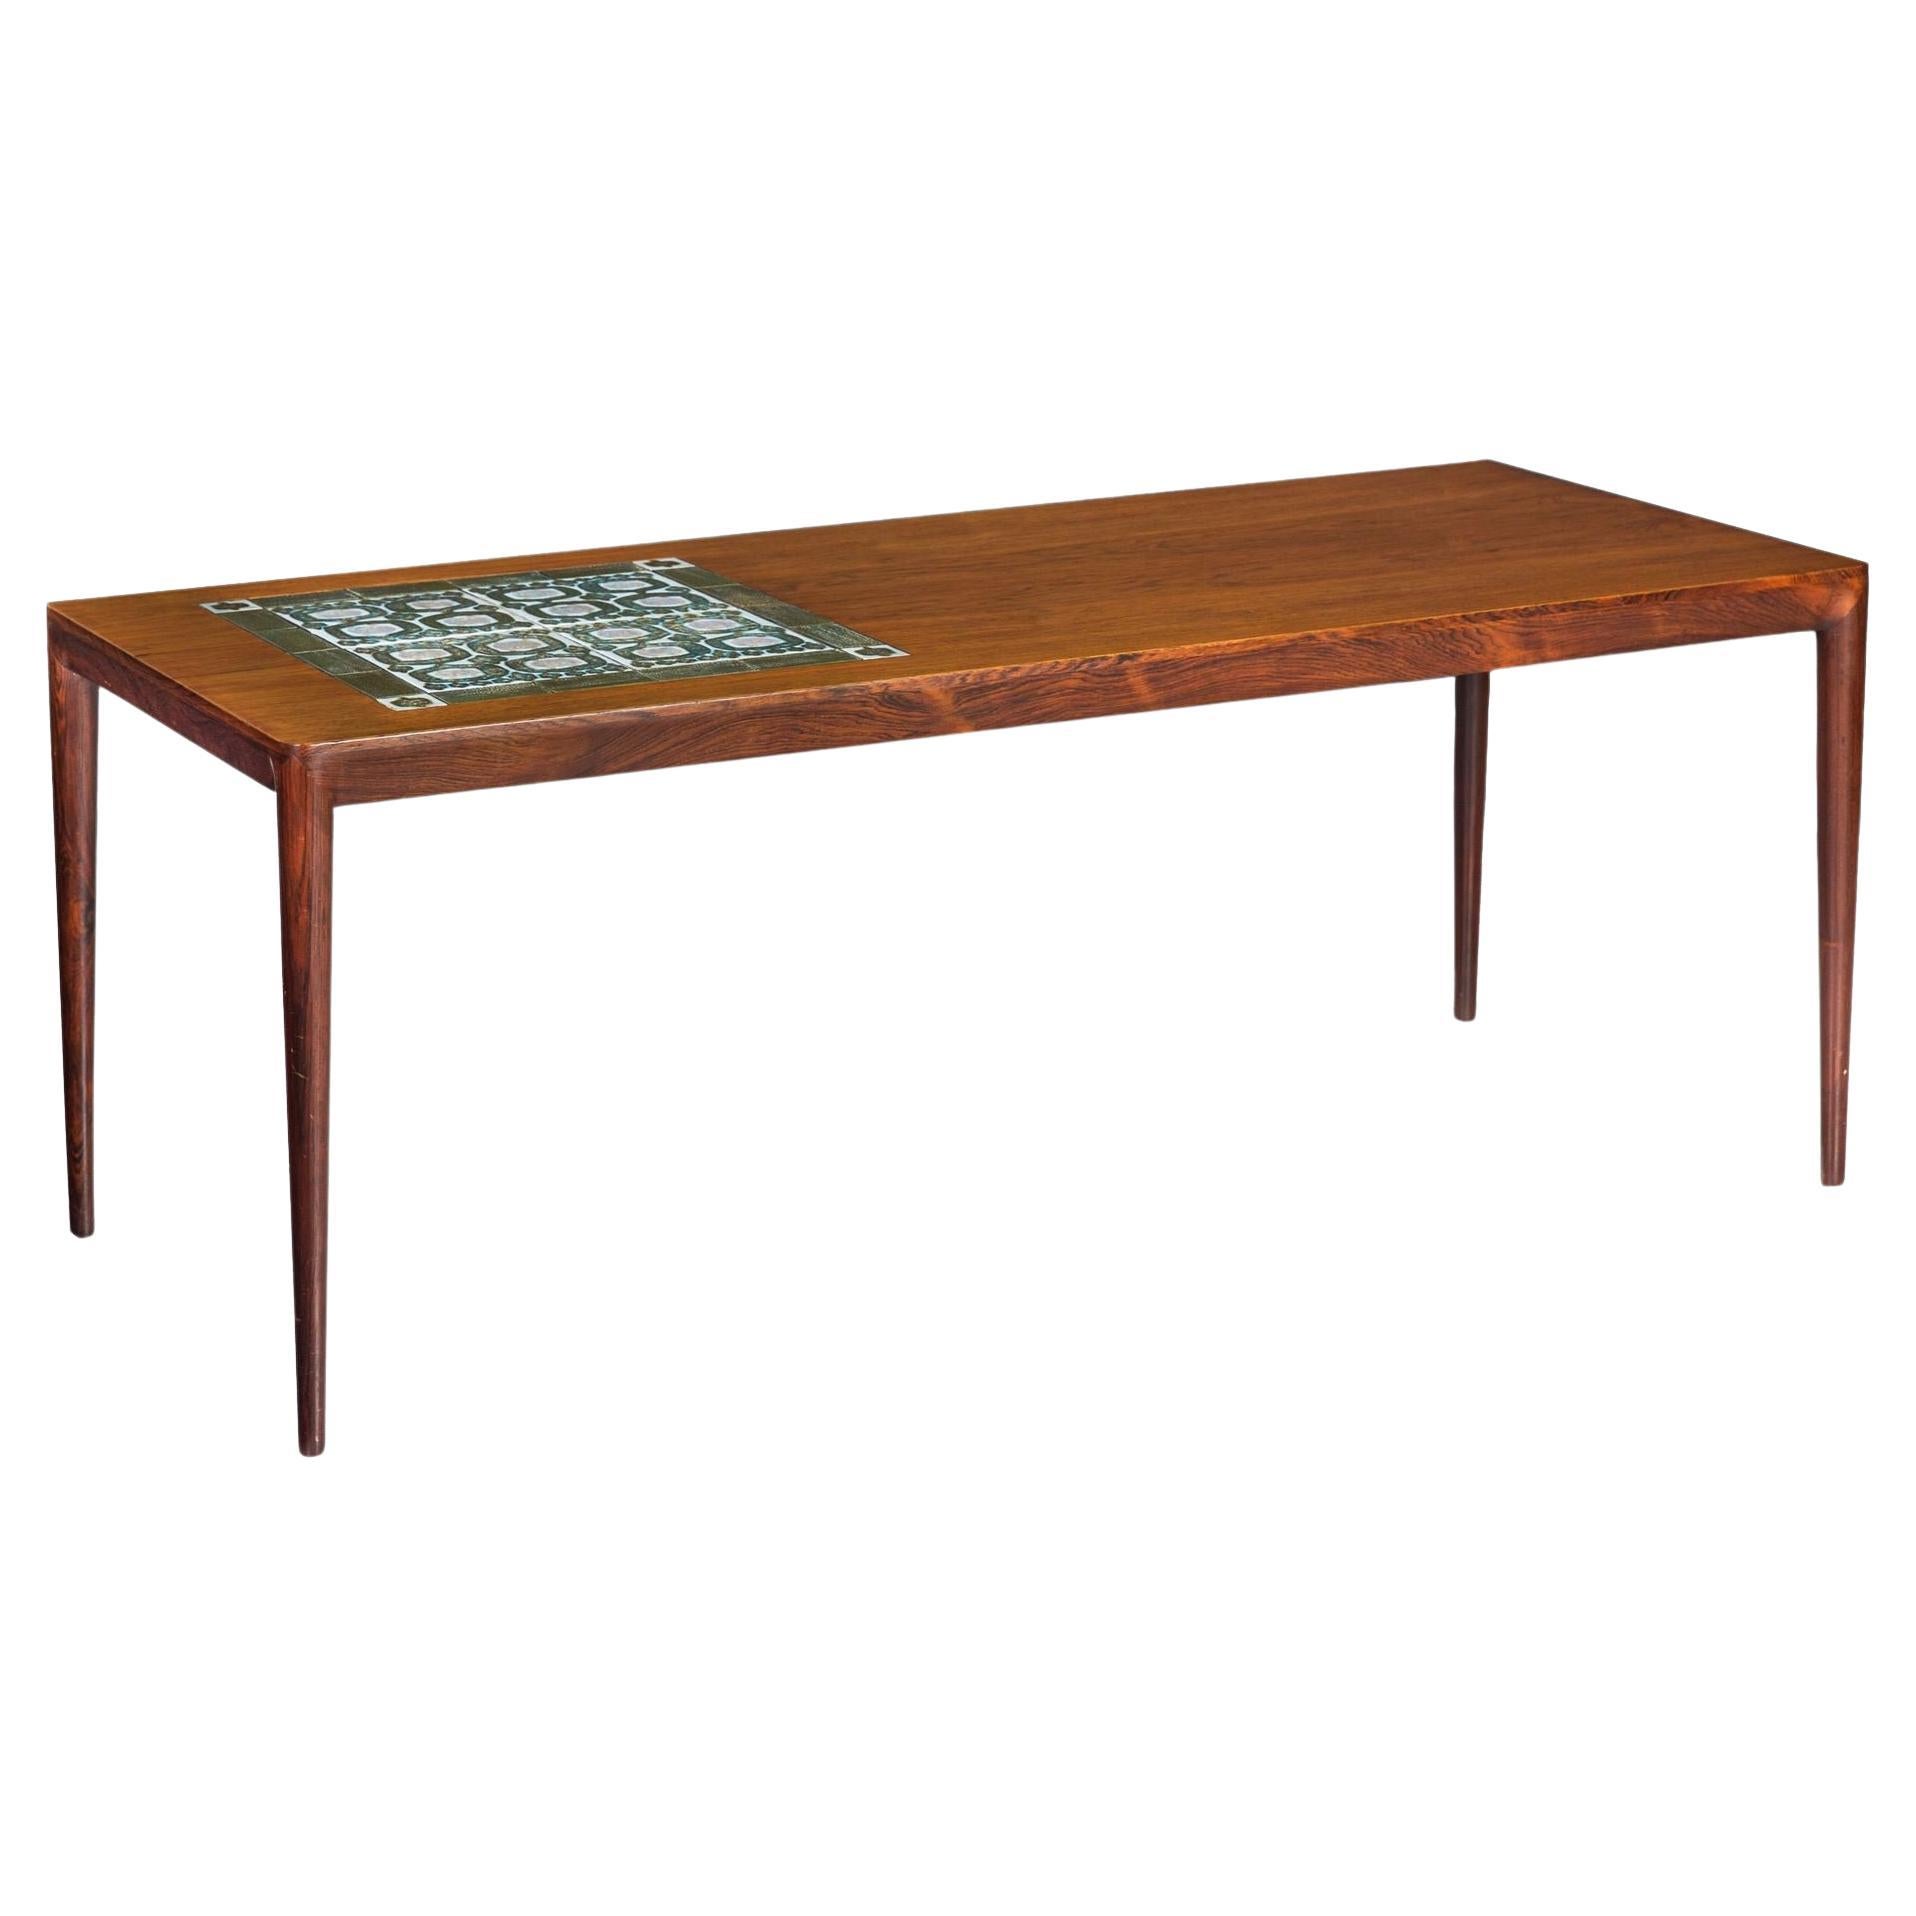 Danish Mid Century Modern Rosewood Coffee Cocktail Table by Severin Hansen Jr. For Sale